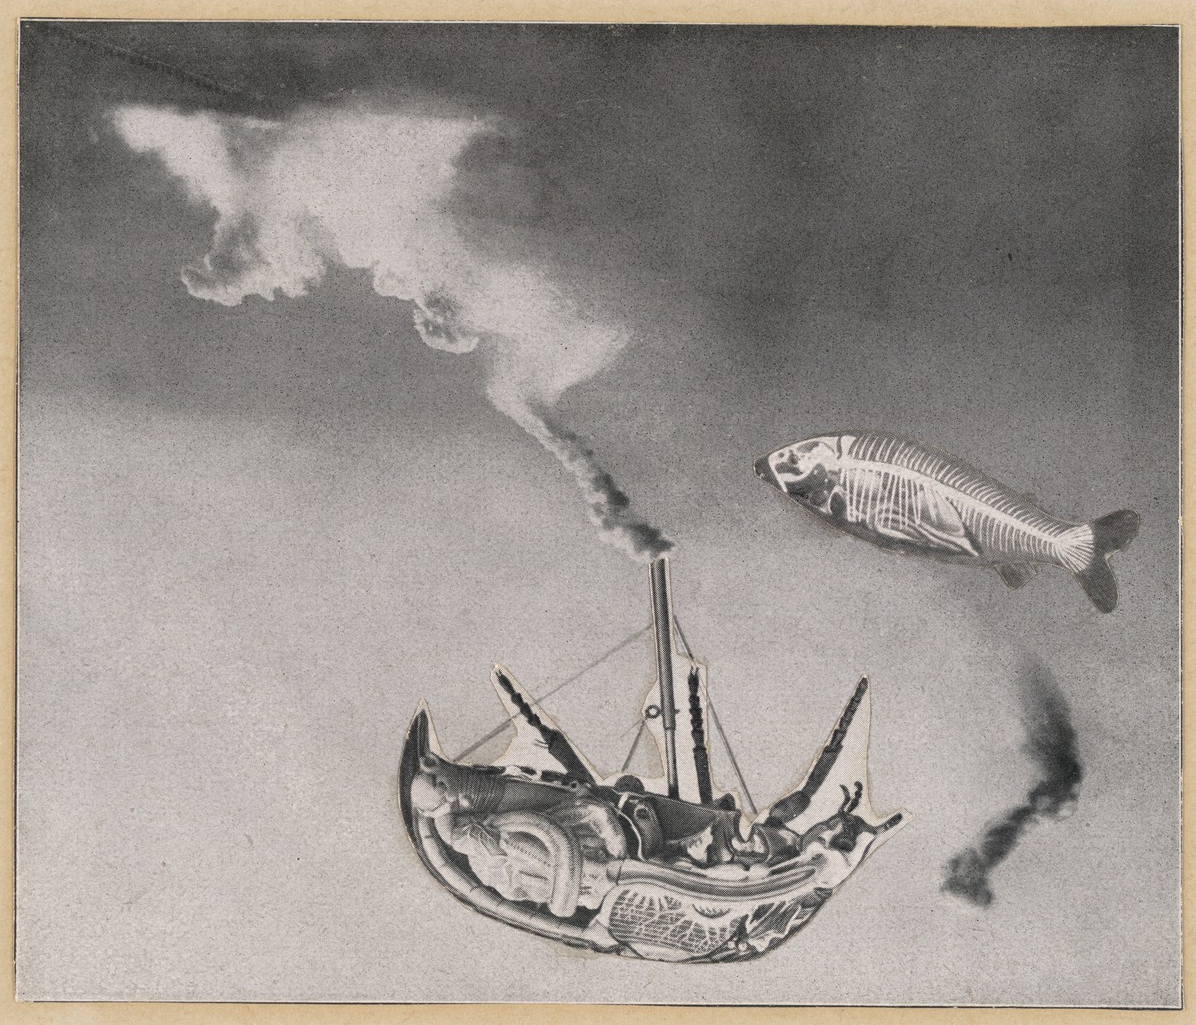 Max Ernst, Here Everything is Still Floating, 1920, printed paper collage with pencil on cardstock, 6 ½ x 8 ¼ inches (MoMA)